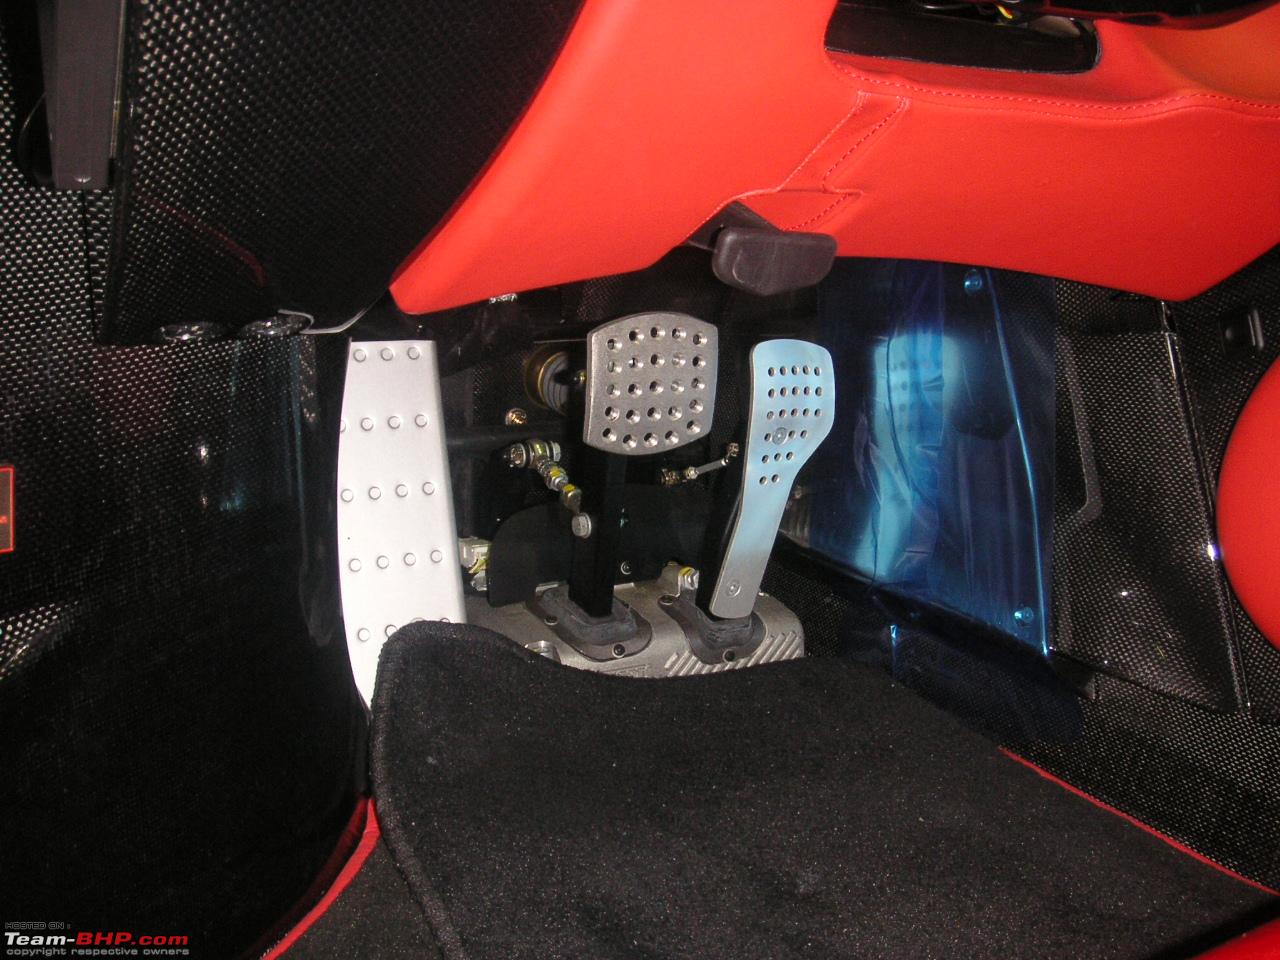 https://www.team-bhp.com/forum/attachments/technical-stuff/1477607d1455779332-what-type-accelerator-pedal-do-you-prefer-organ-vs-suspended-brake_and_gas_pedals_of_enzo_ferrari.jpg